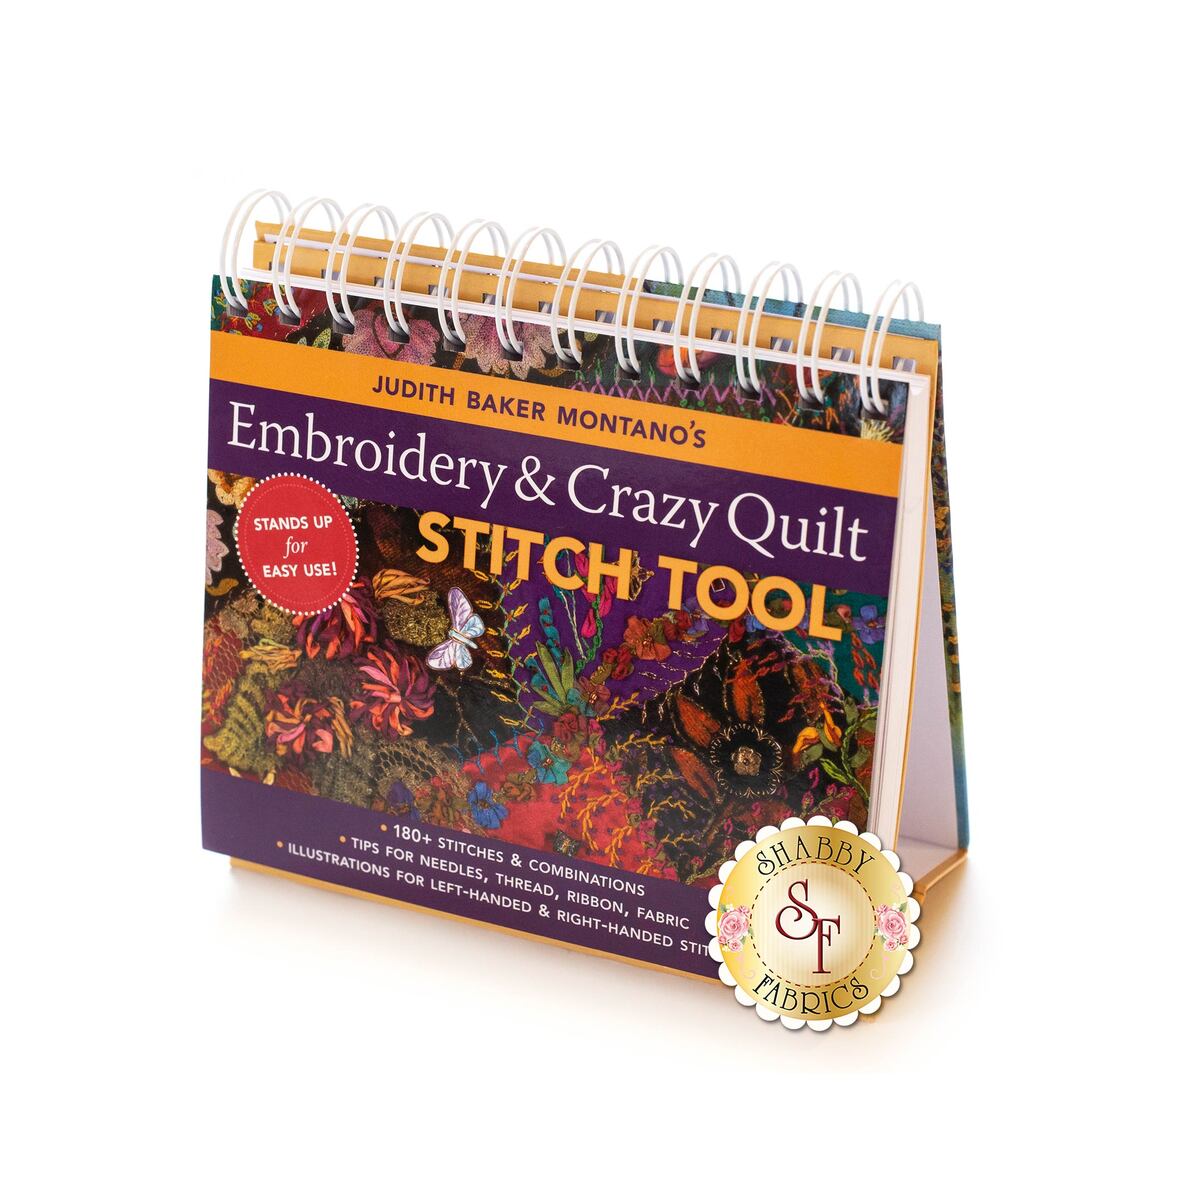 The Amazing Stitching Handbook for (not only?) Kids –